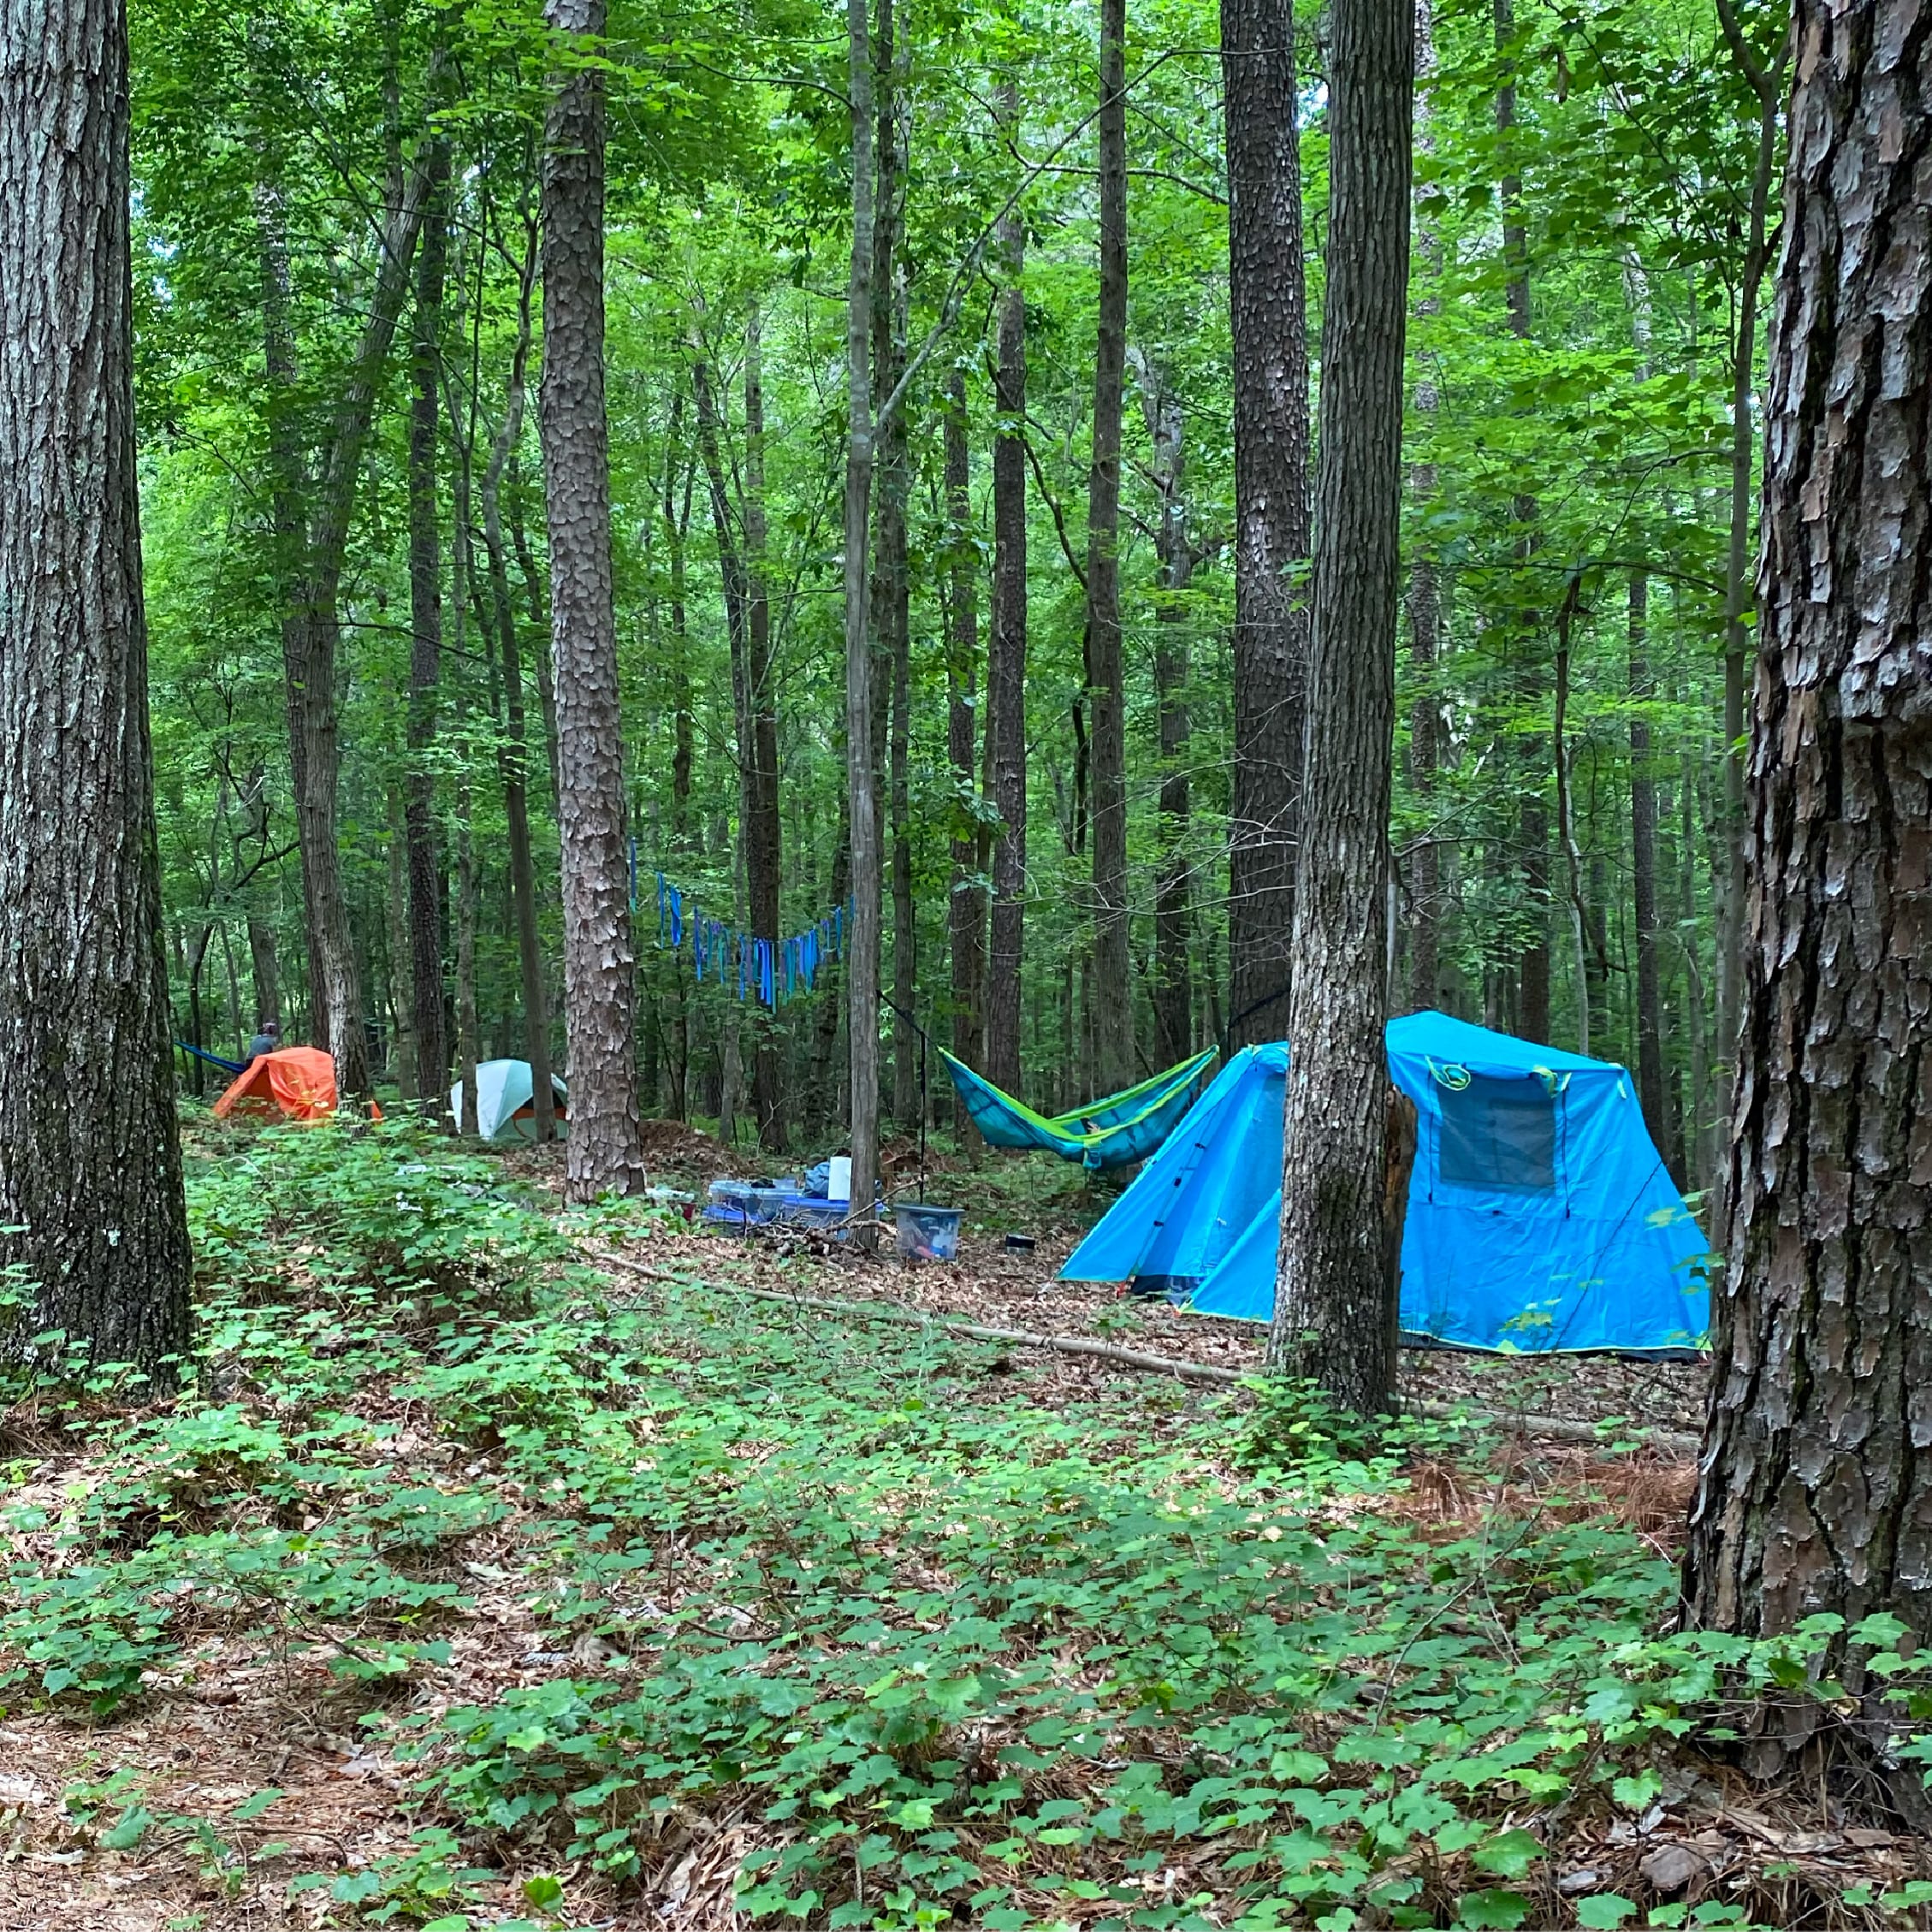 Our sites have plenty of space for tents and hammocks!